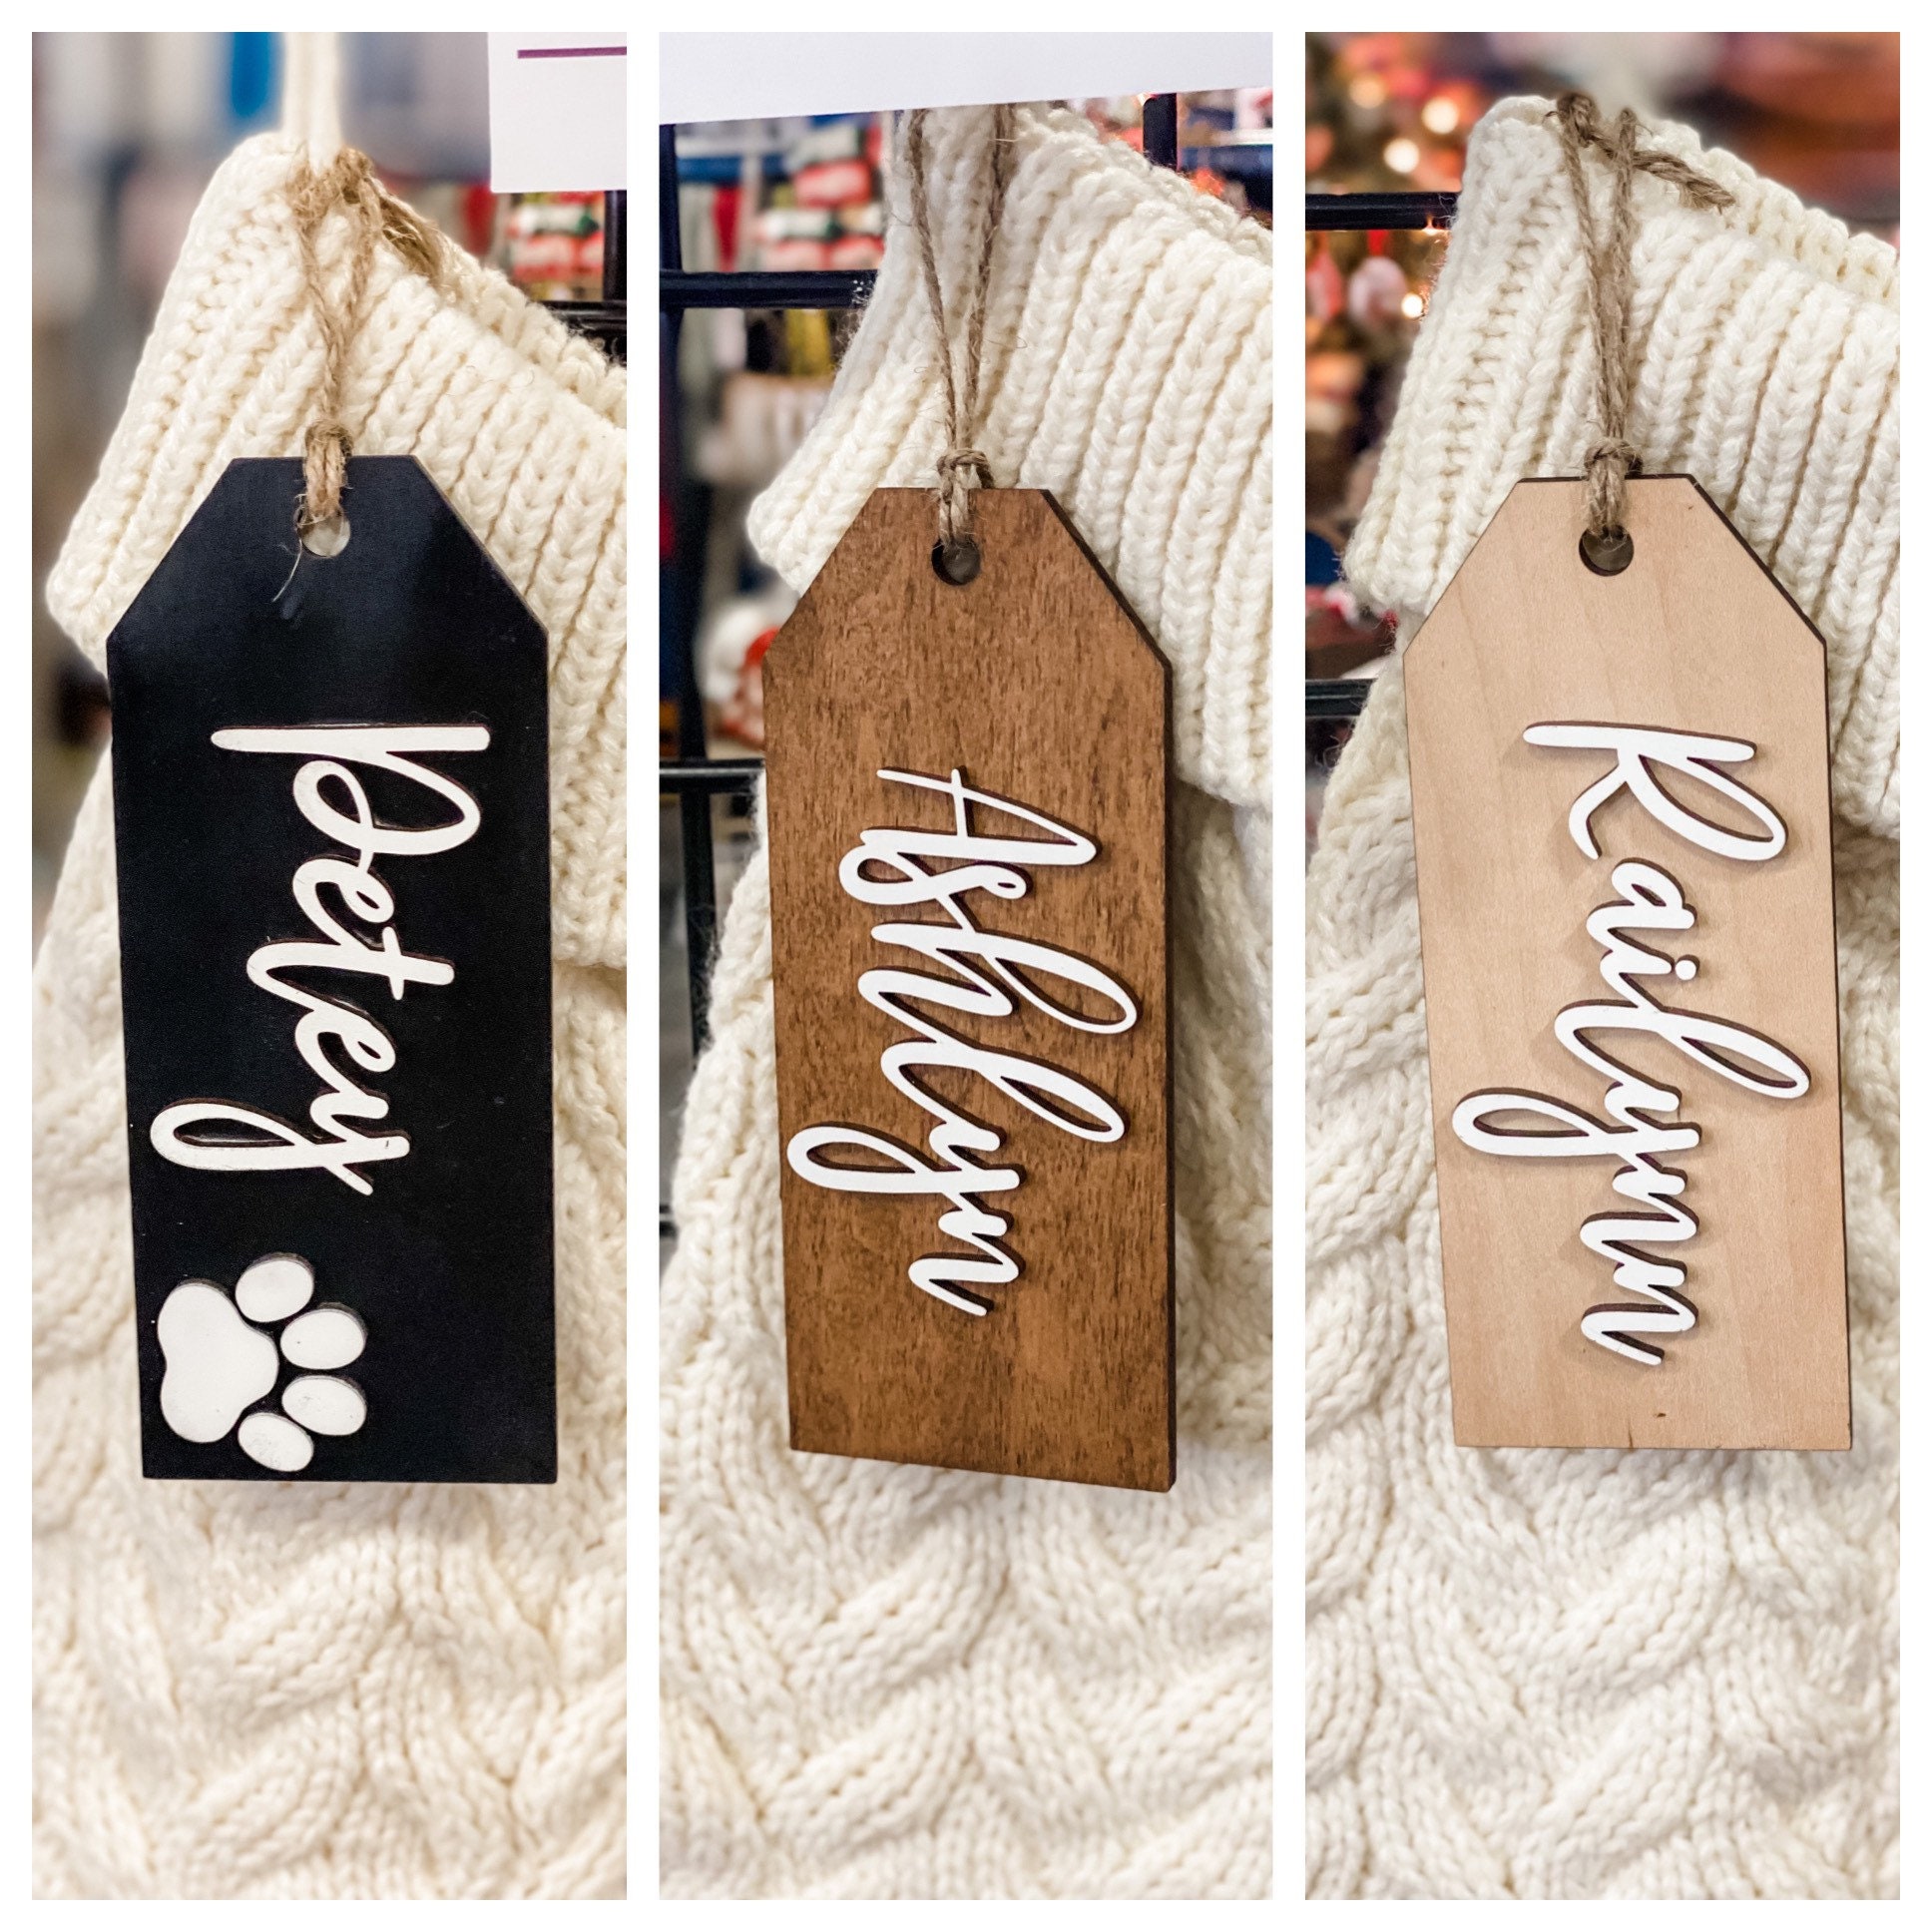 Wooden Stocking Name Tags, Personalized Stocking Name Tags, Farmhouse Stocking  Name Tags, Farmhouse Christmas Decor 